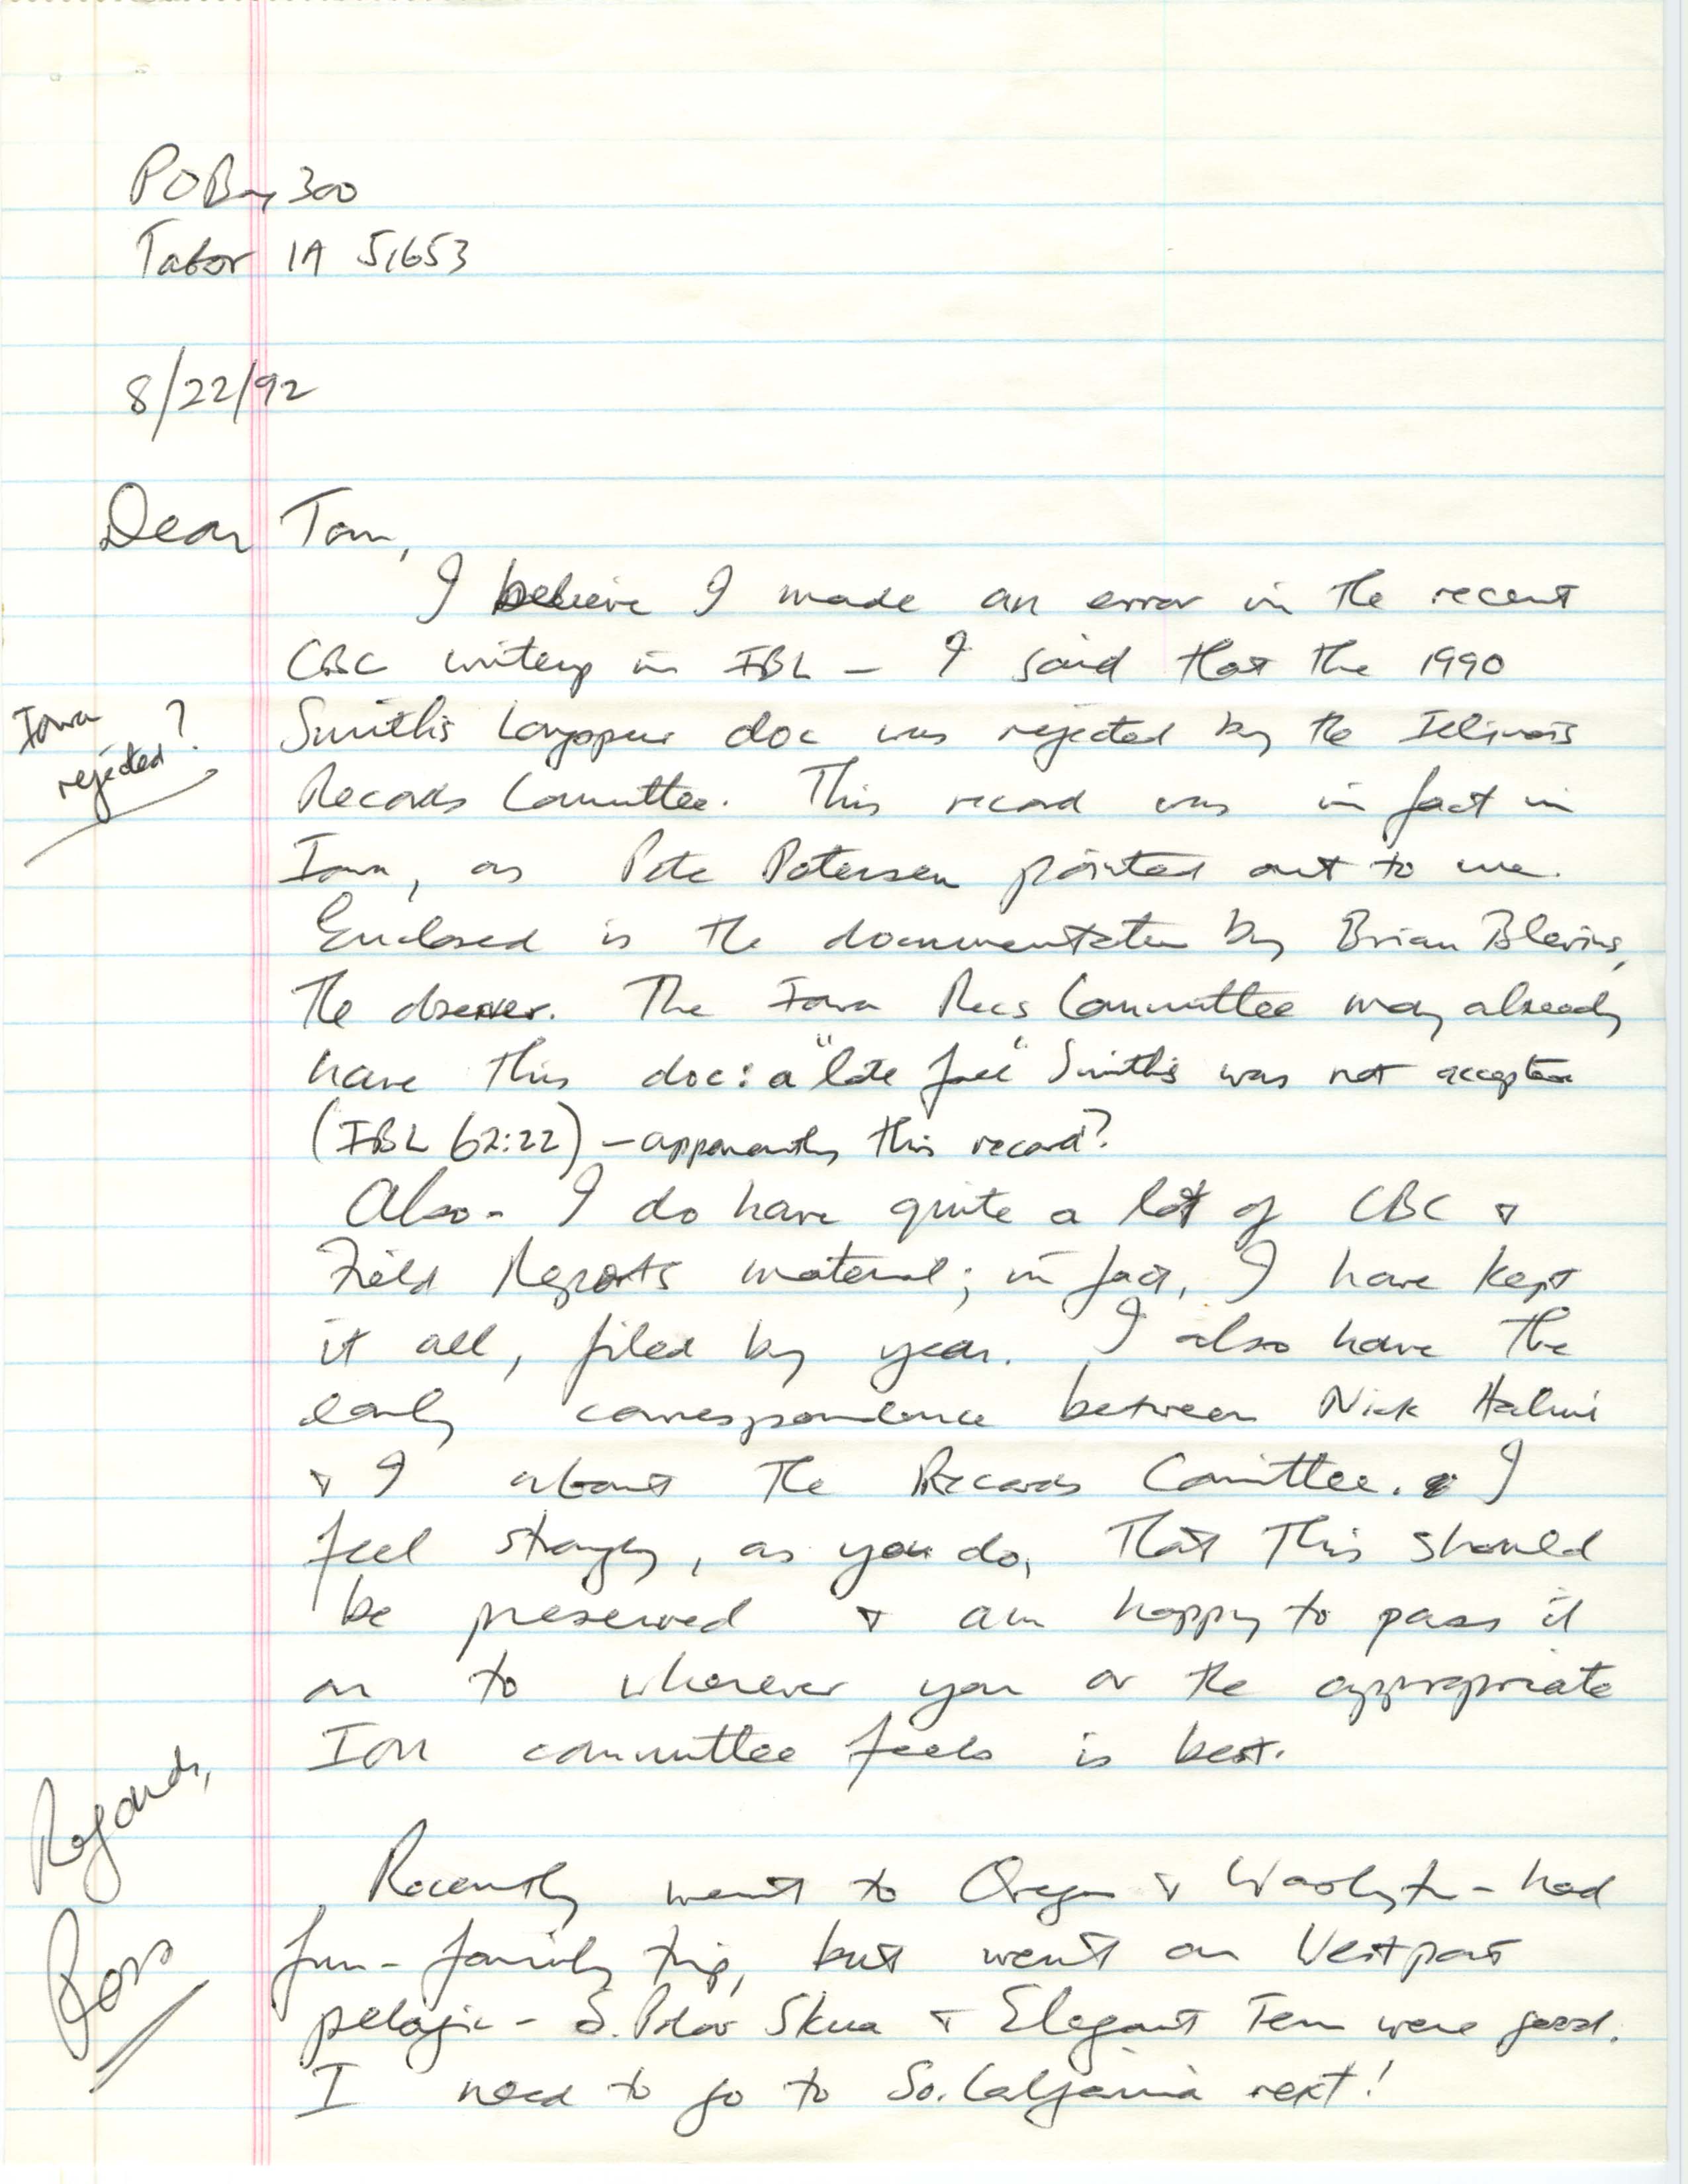 Ross Silcock letter to Thomas Kent regarding a Smith's Longspur and other bird sighting materials, August 22, 1992